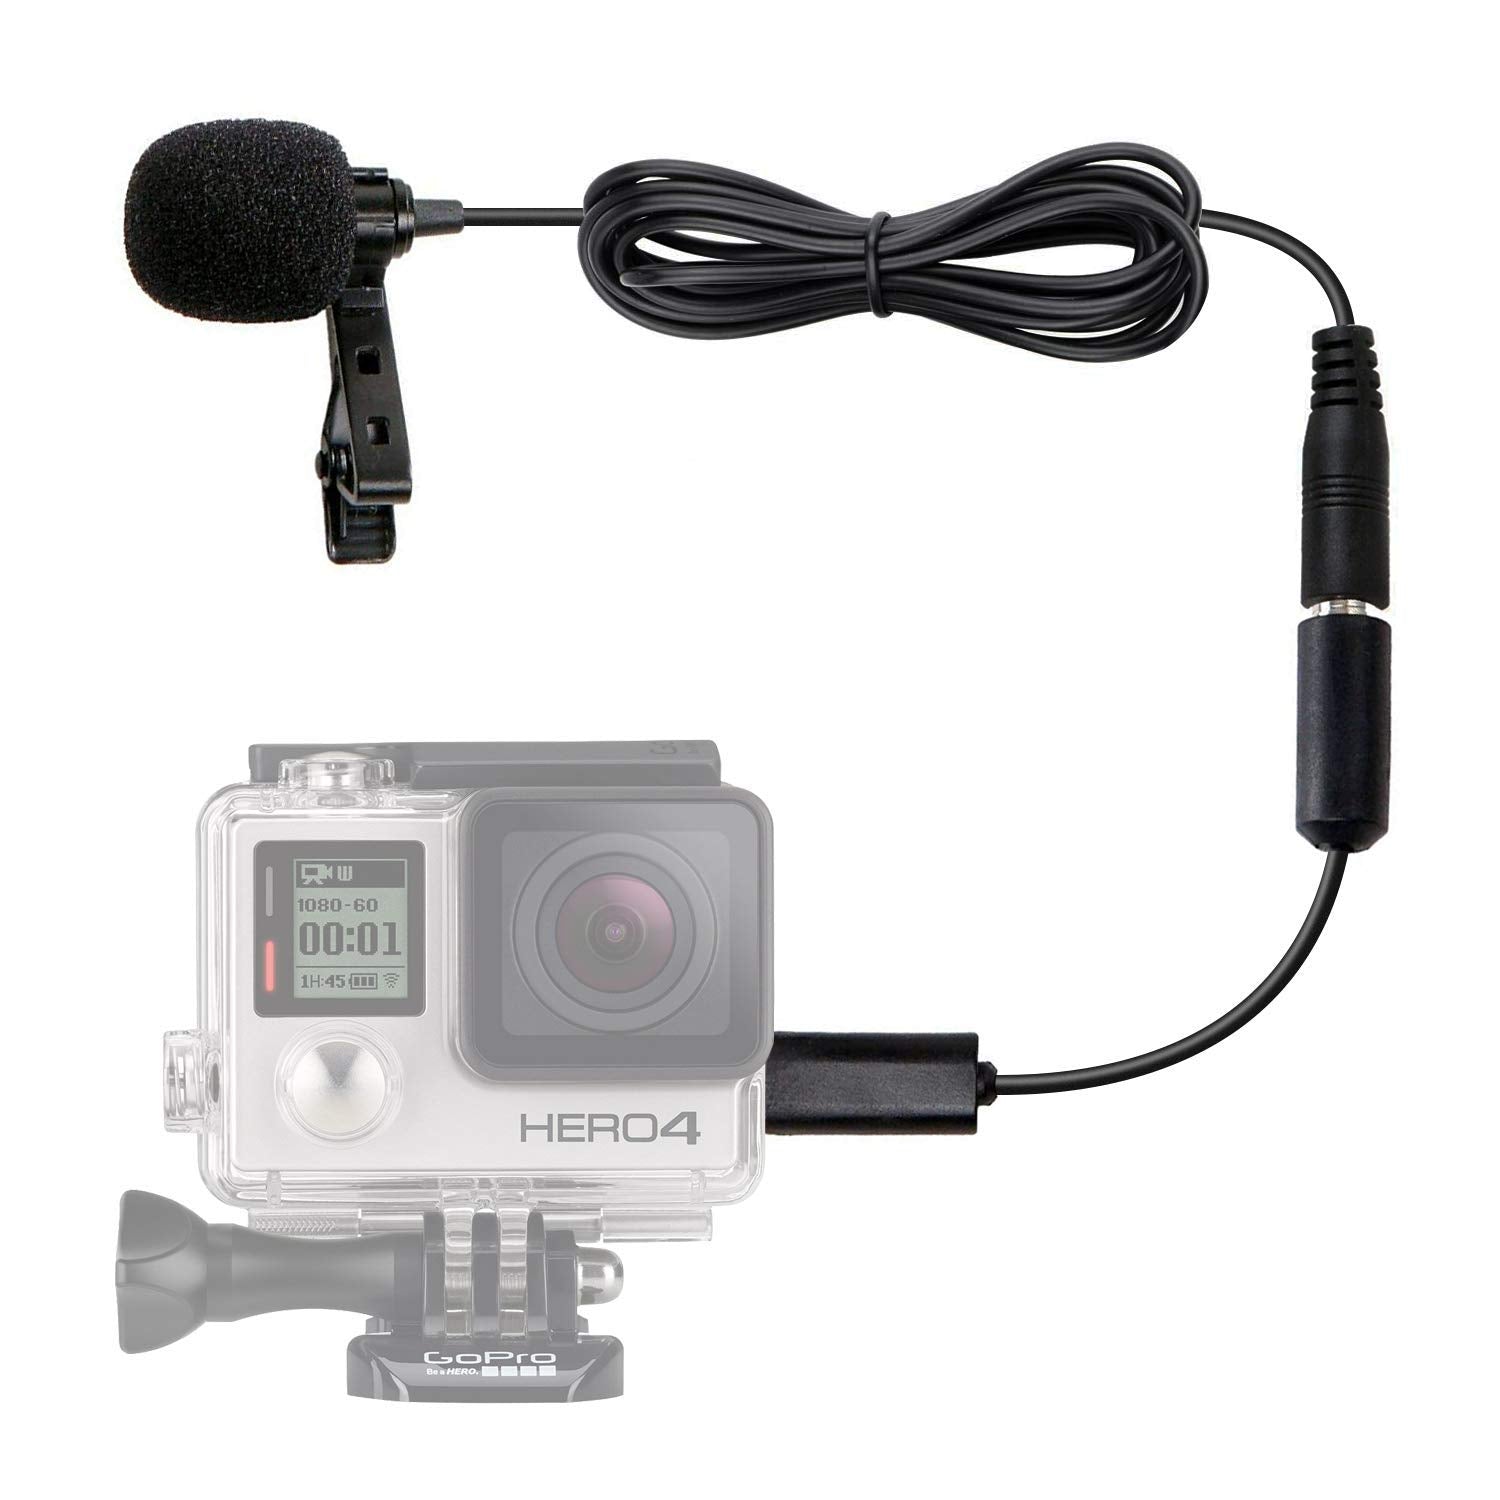 Movo GM100 Clip-on Lavalier Microphone for Compatible with GoPro HERO3, HERO3+ and HERO4 Black, White and Silver Editions - Includes Mic Adapter for Go Pro  - Acceptable